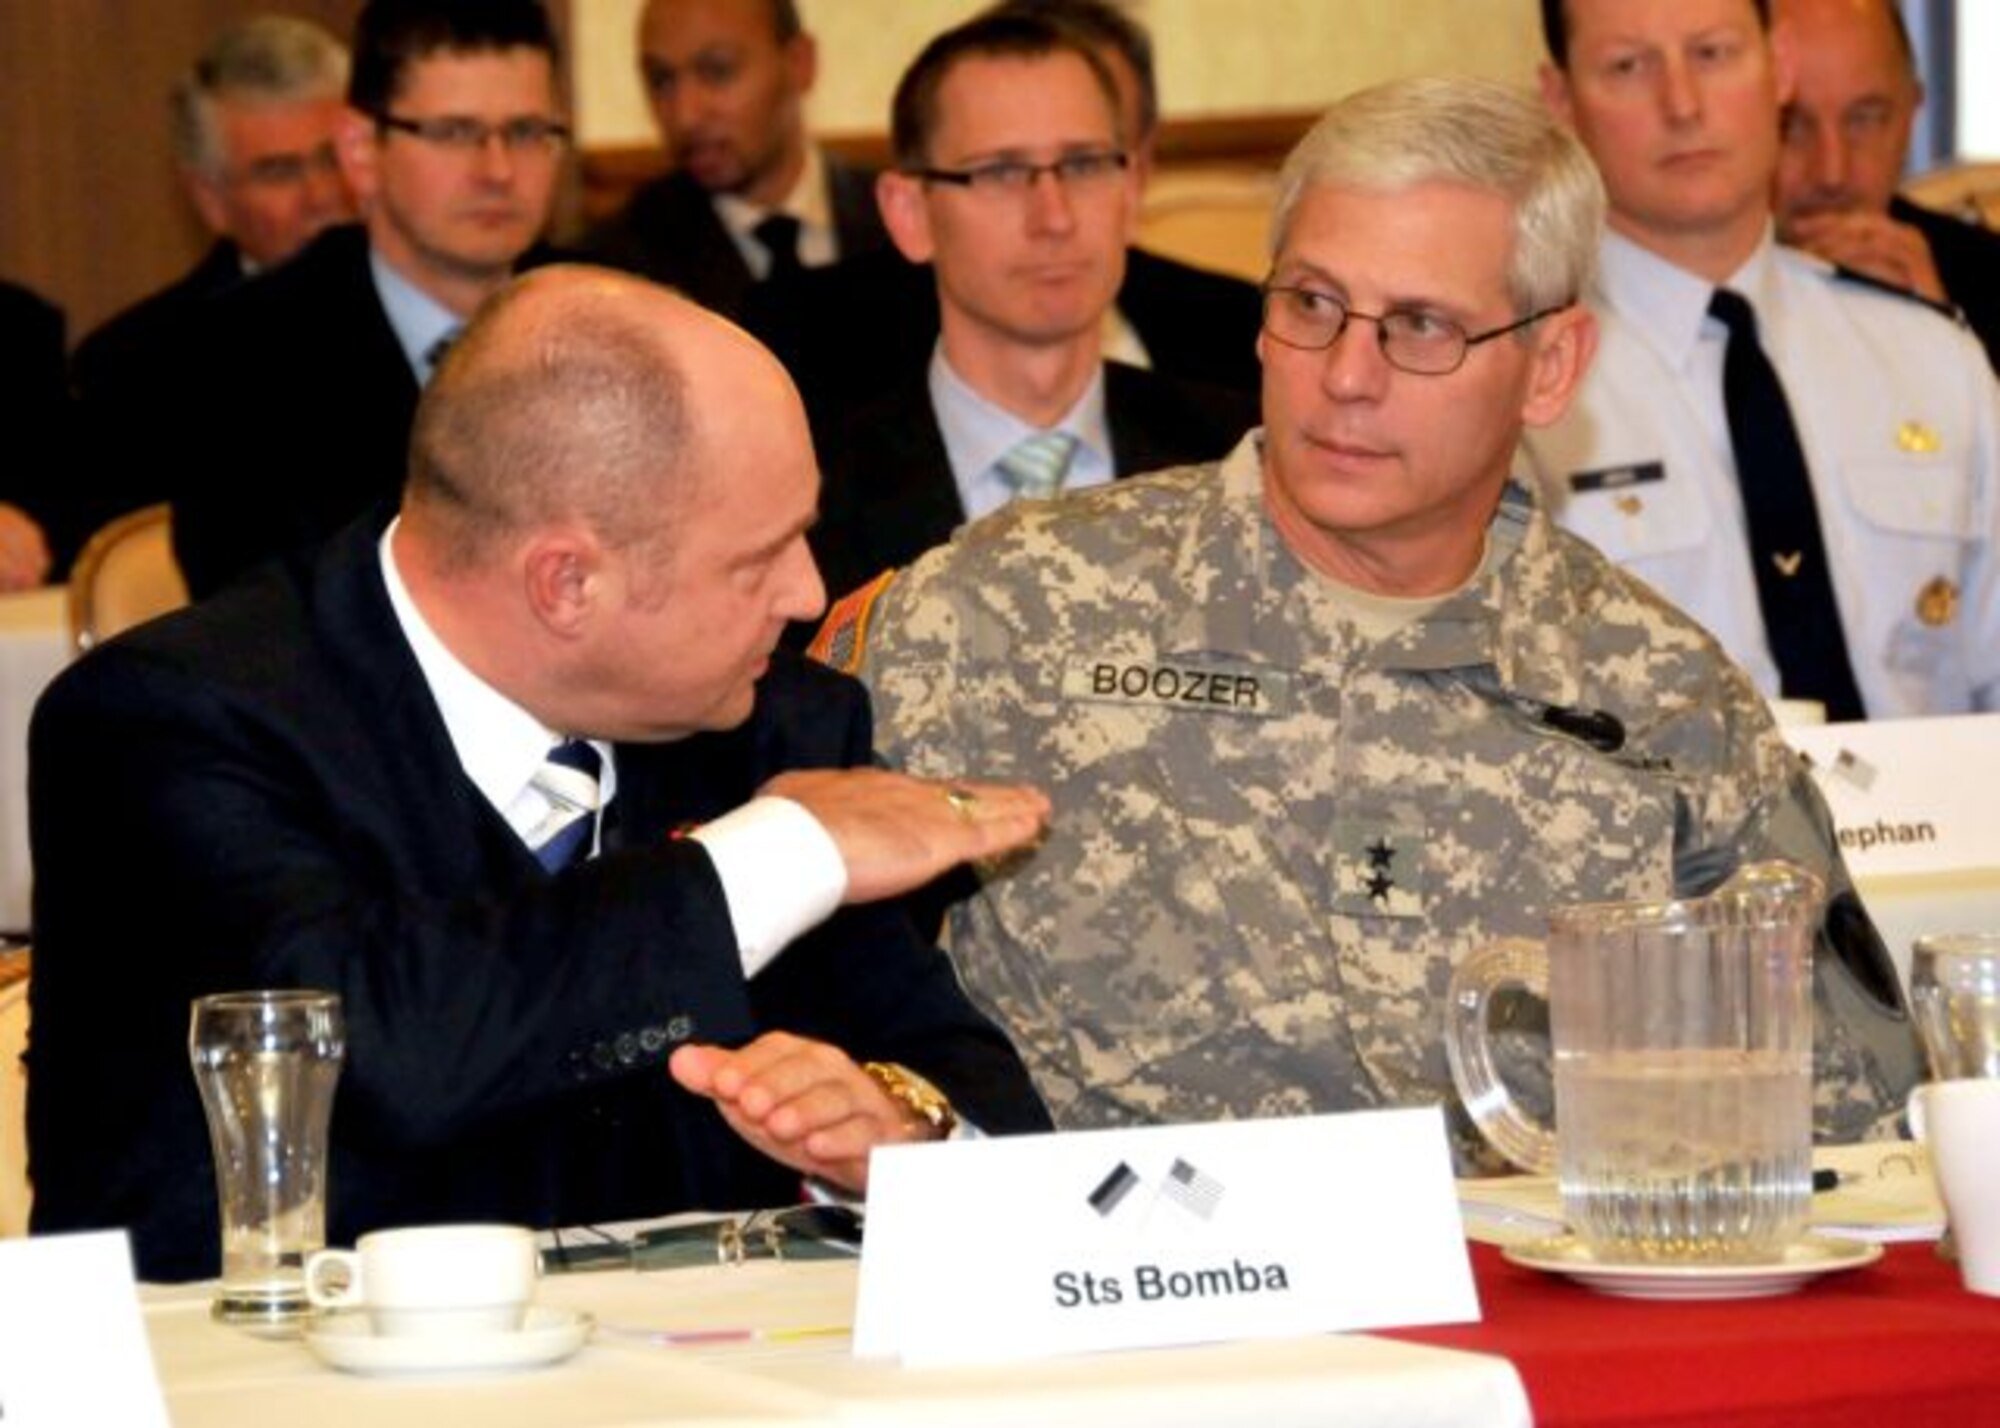 German Undersecretary Rainer Bomba, German Federal Ministry for Traffic and Construction, and Major Gen. James Boozer, and U.S. Army Europe deputy commanding general, share some thoughts during a meeting about the proposed new KMC Medical Facility at the Armstrong Club, Vogelweh Air Base, Germany Feb. 27, 2012. (U.S. Air Force photo/Tech. Sgt. Markus M. Maier)(Released)